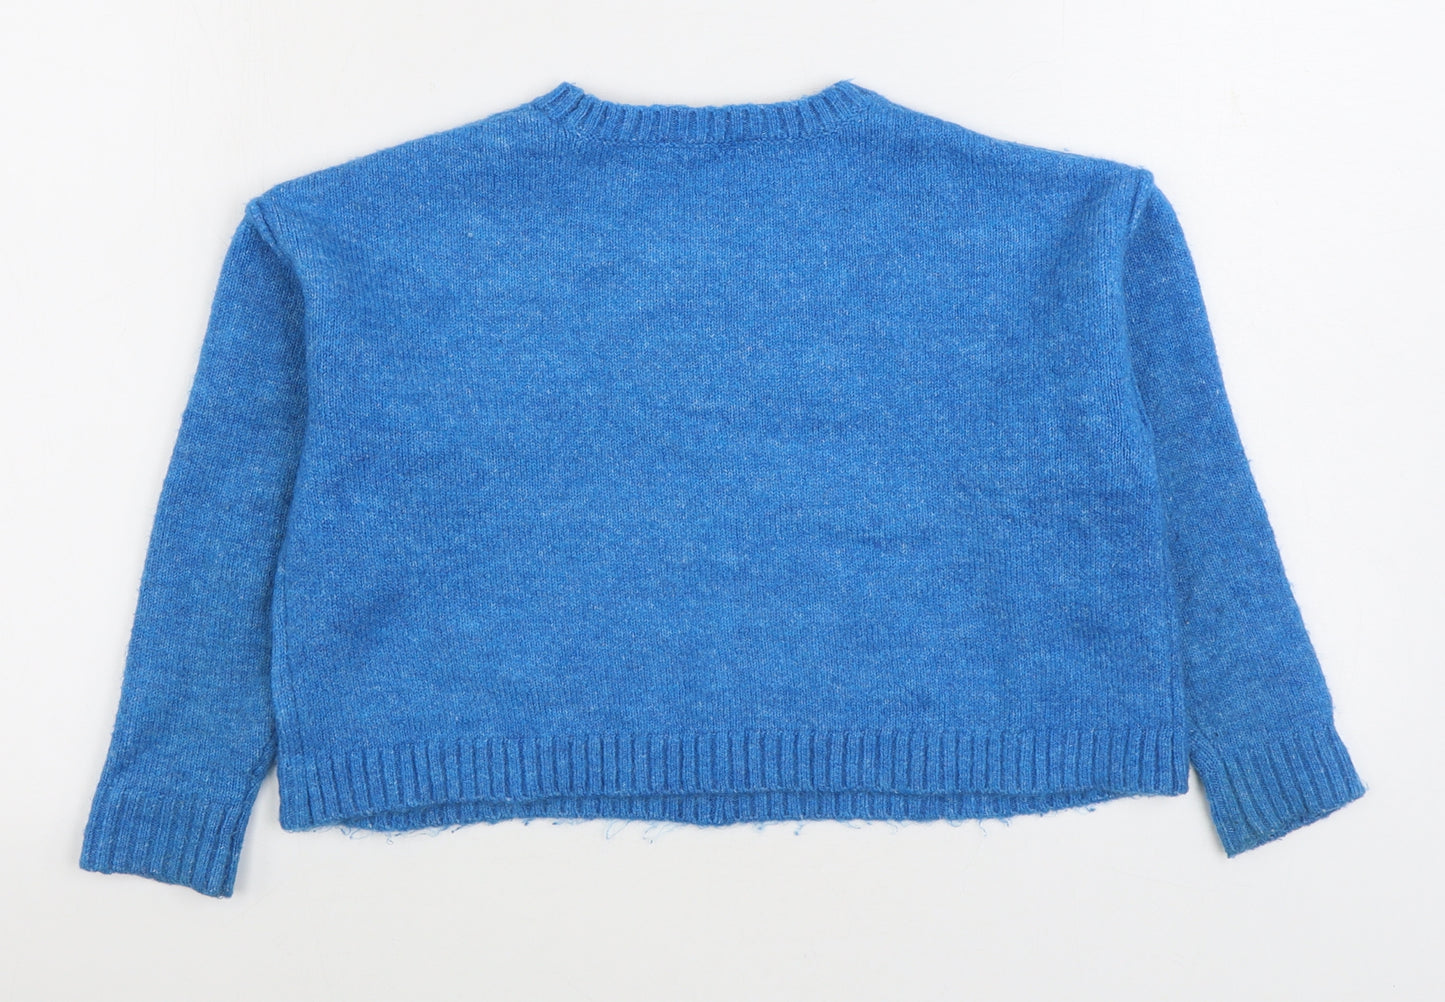 Mis E-Vie Girls Blue Round Neck Acrylic Pullover Jumper Size 9-10 Years Pullover